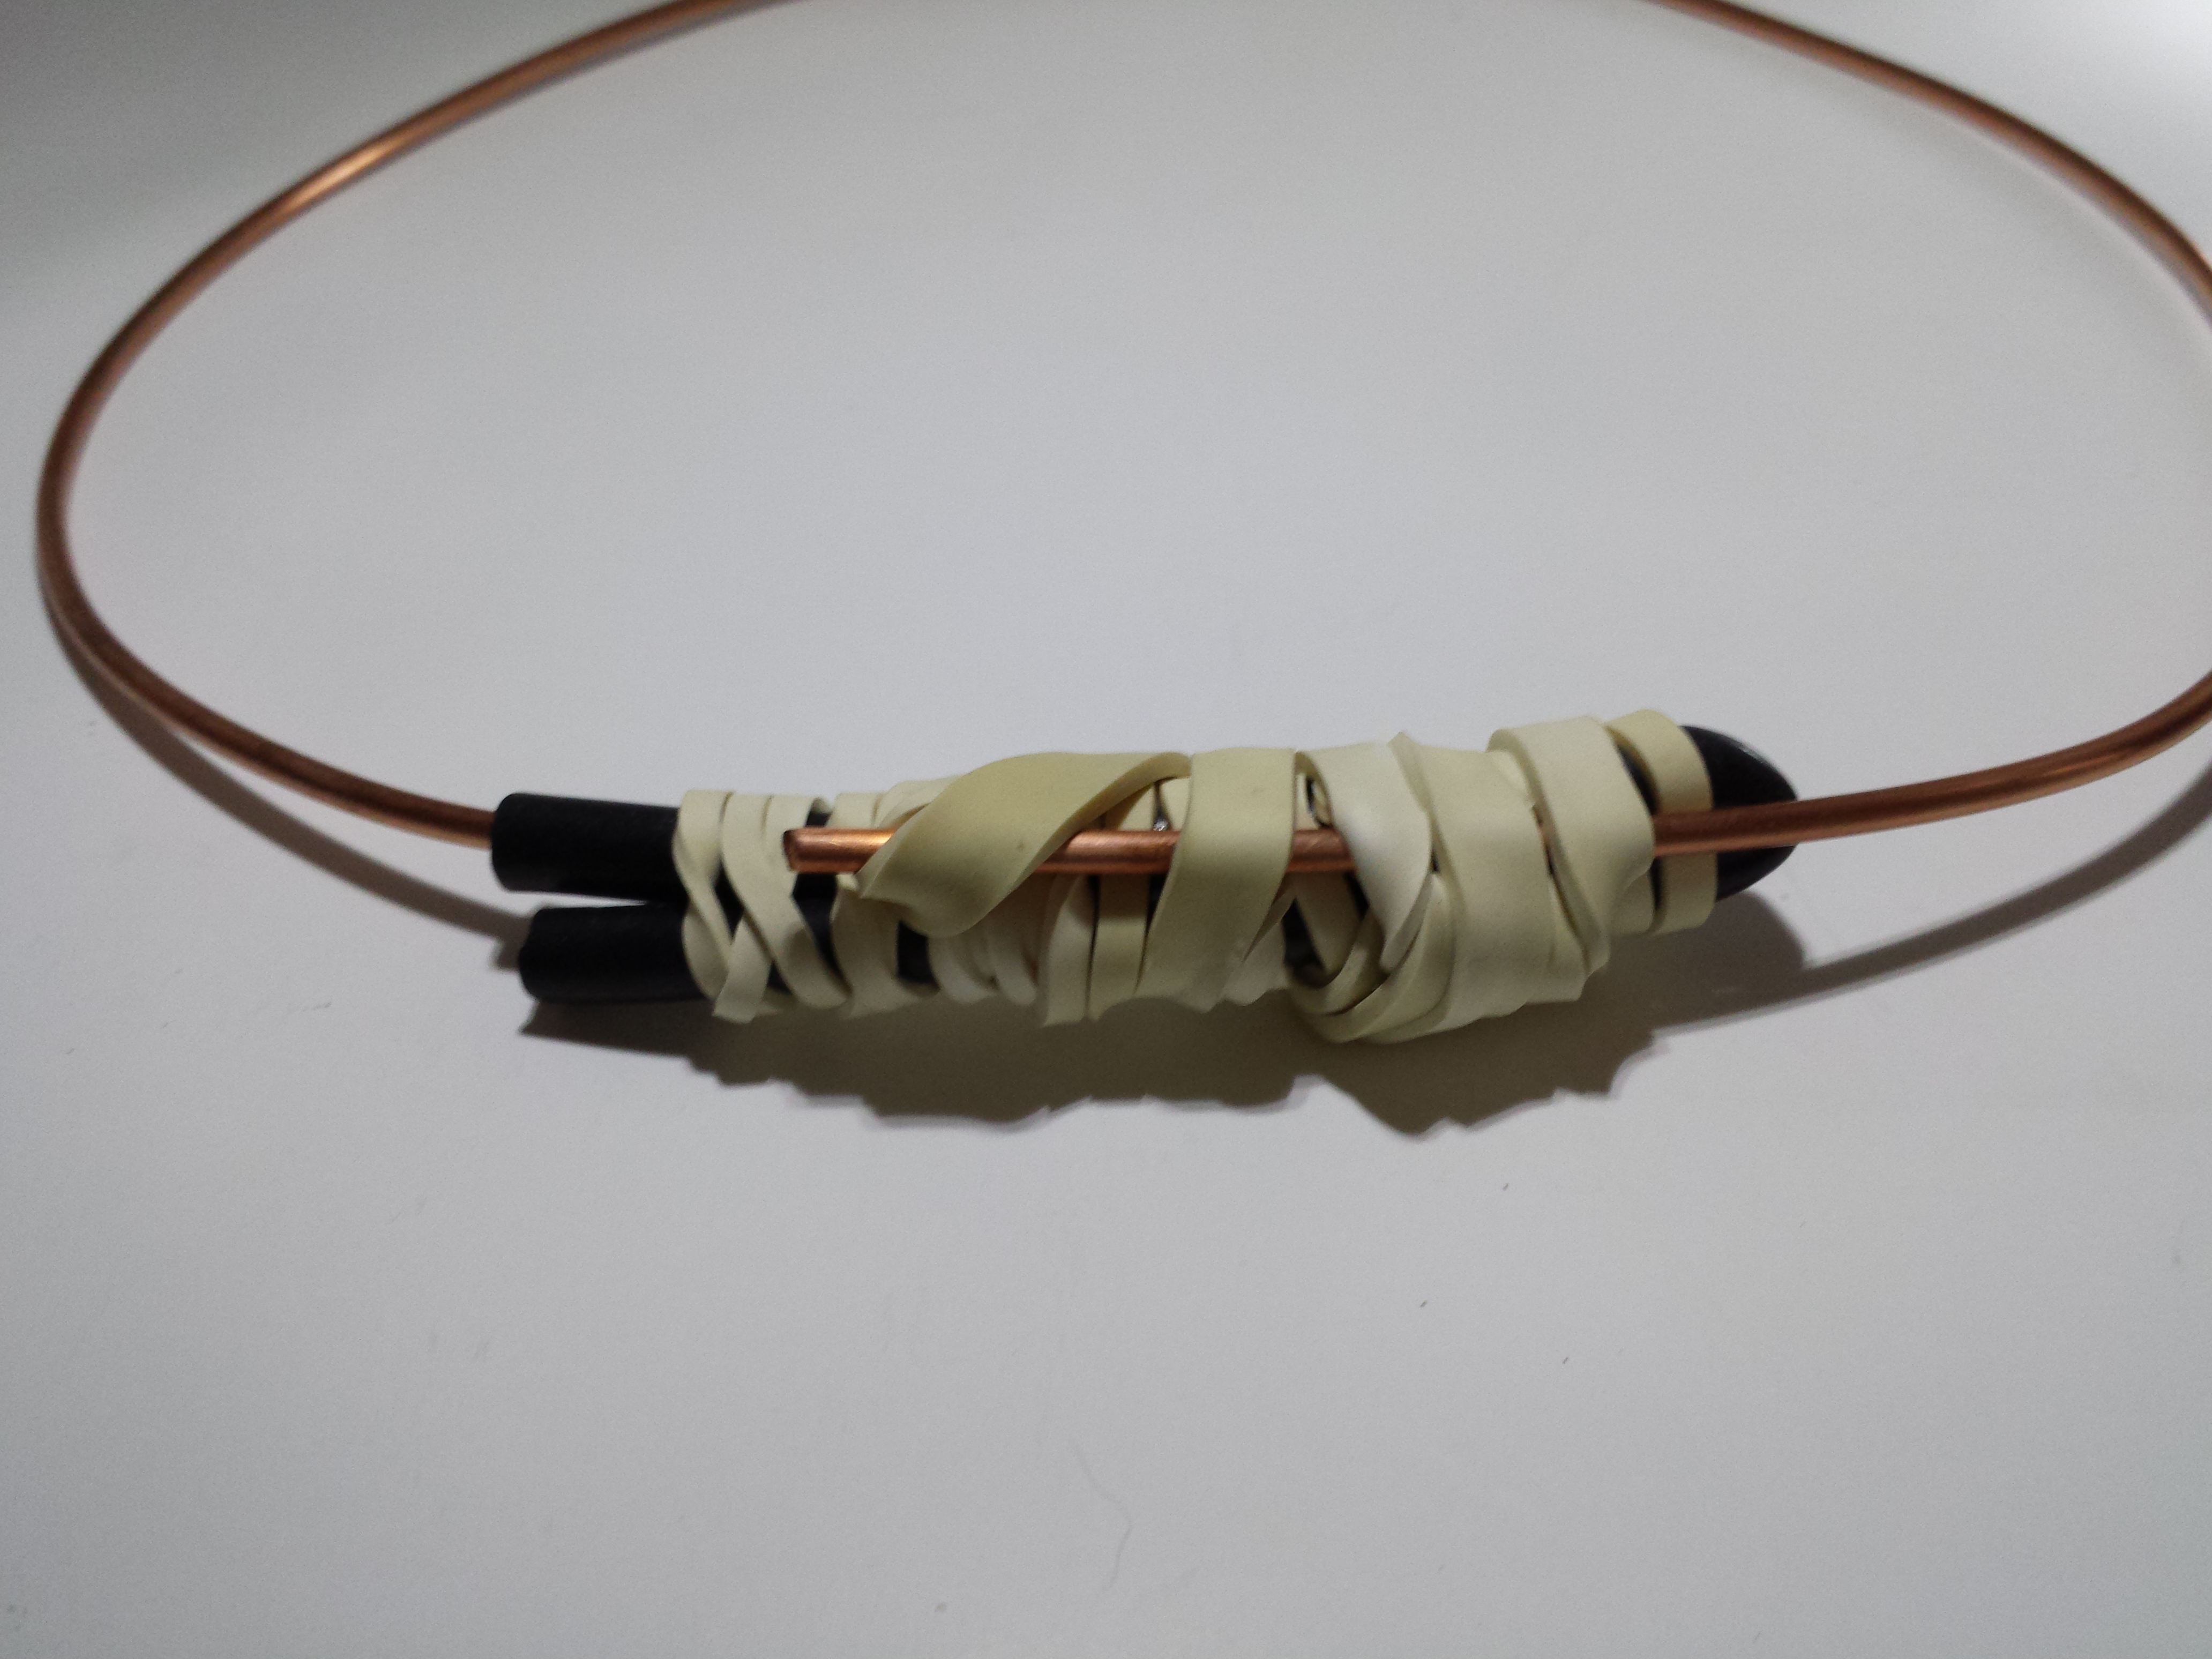 Copper wire secured with rubber band